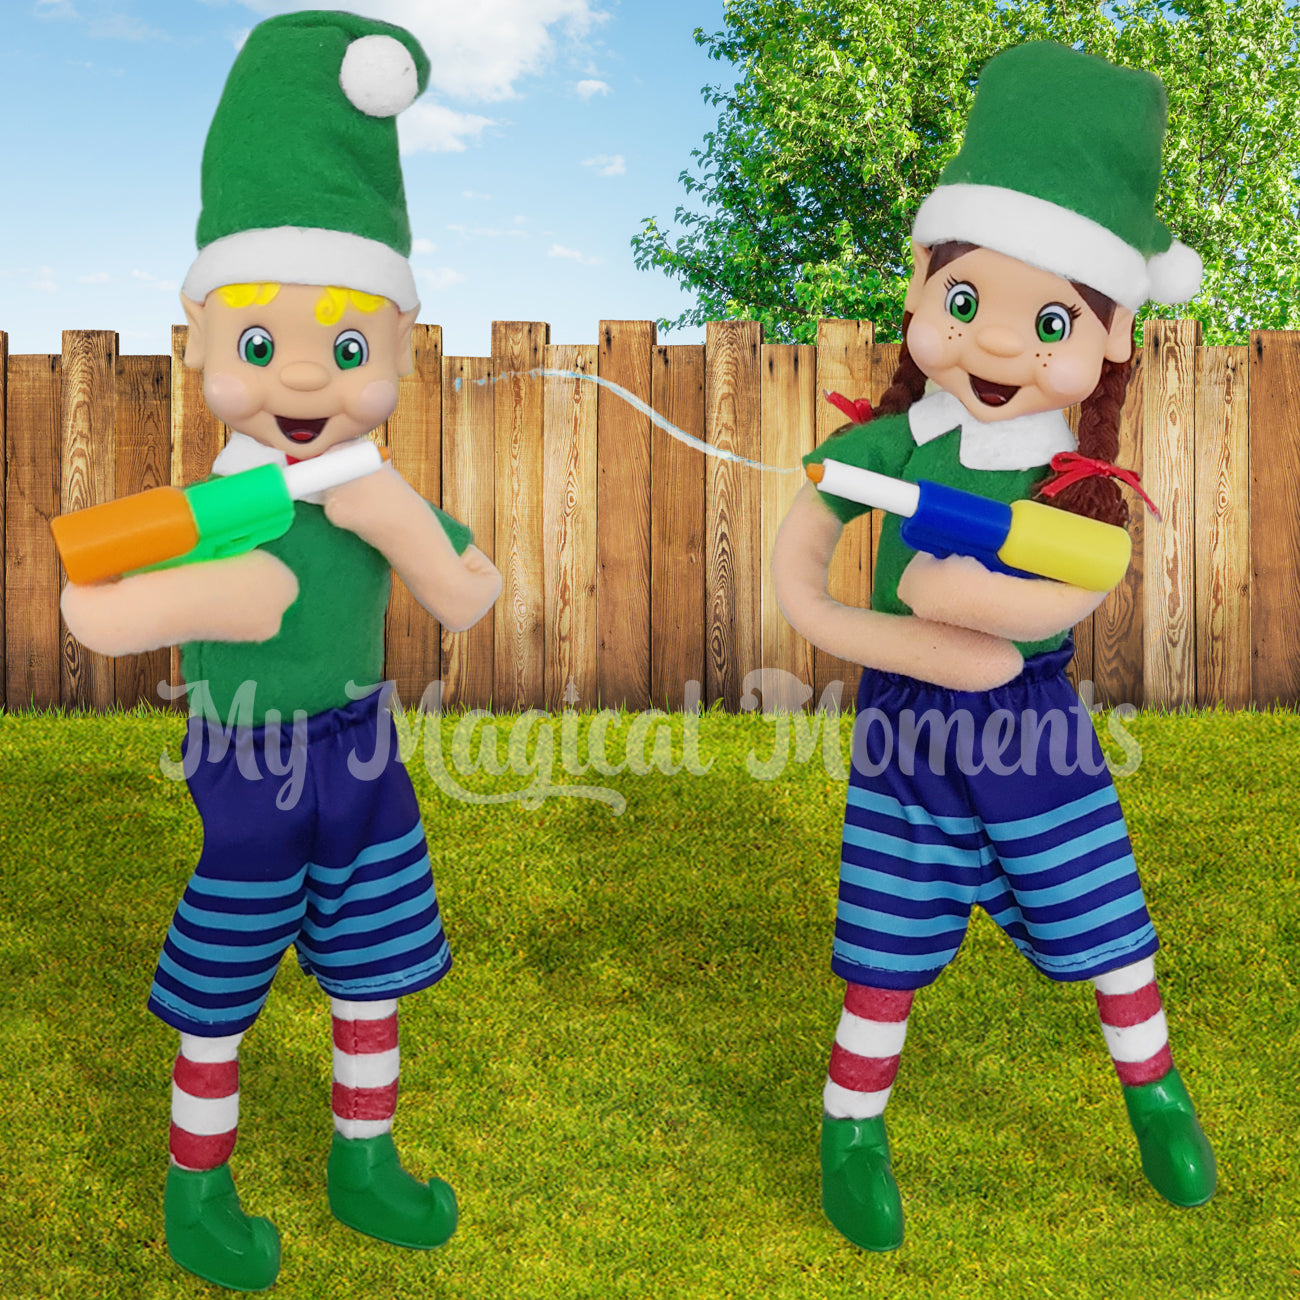 My elf friends wearing boardshorts playing with water guns